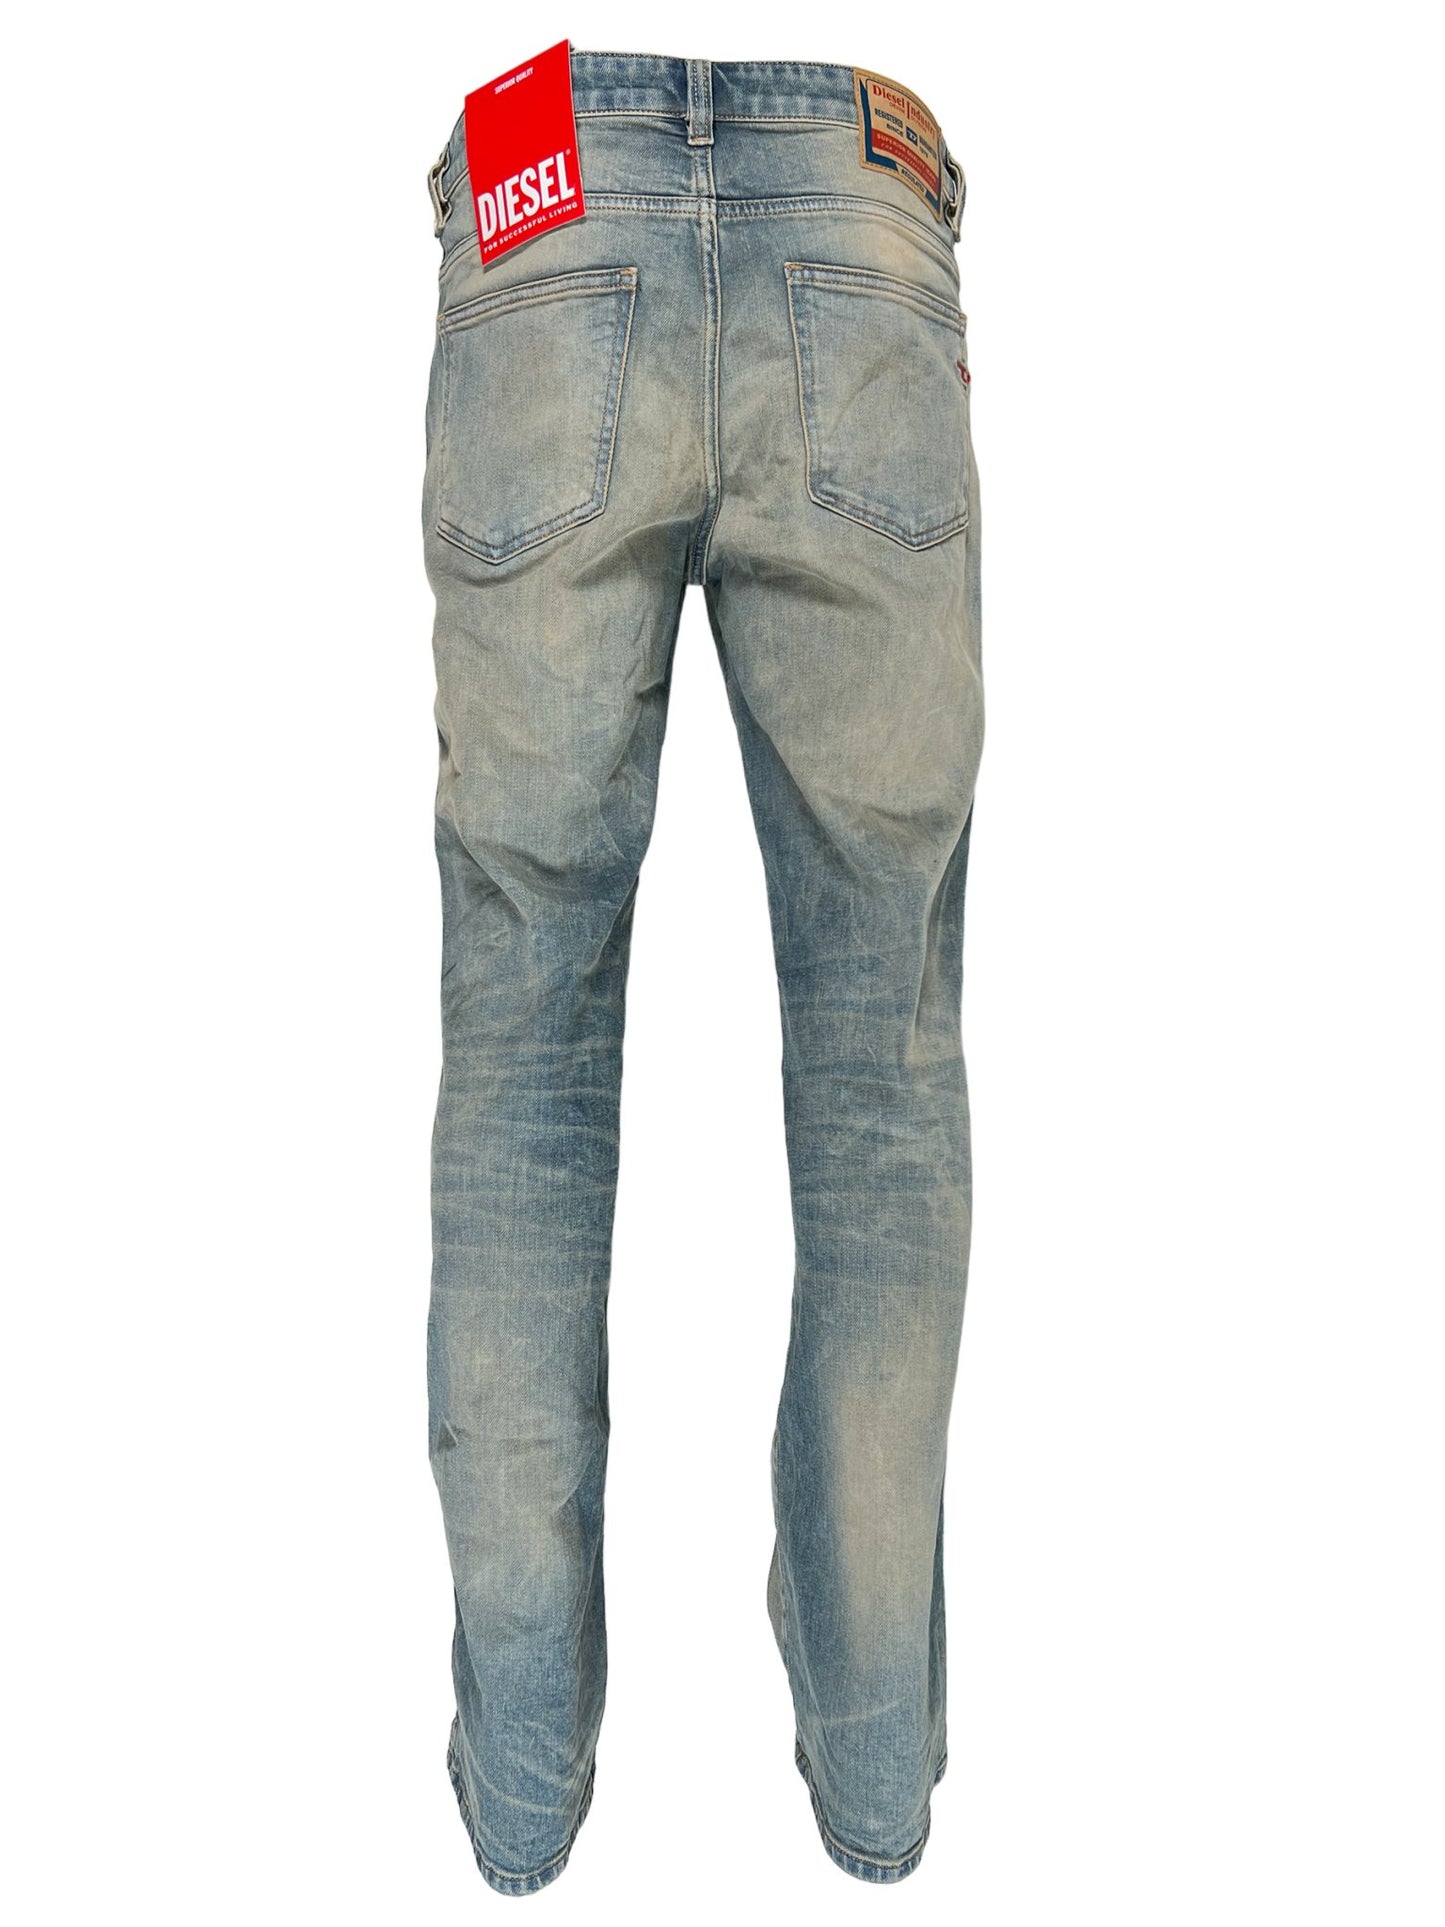 A pair of DIESEL 1998 D-BUCK 9H78 bootcut jeans displayed against a white background.